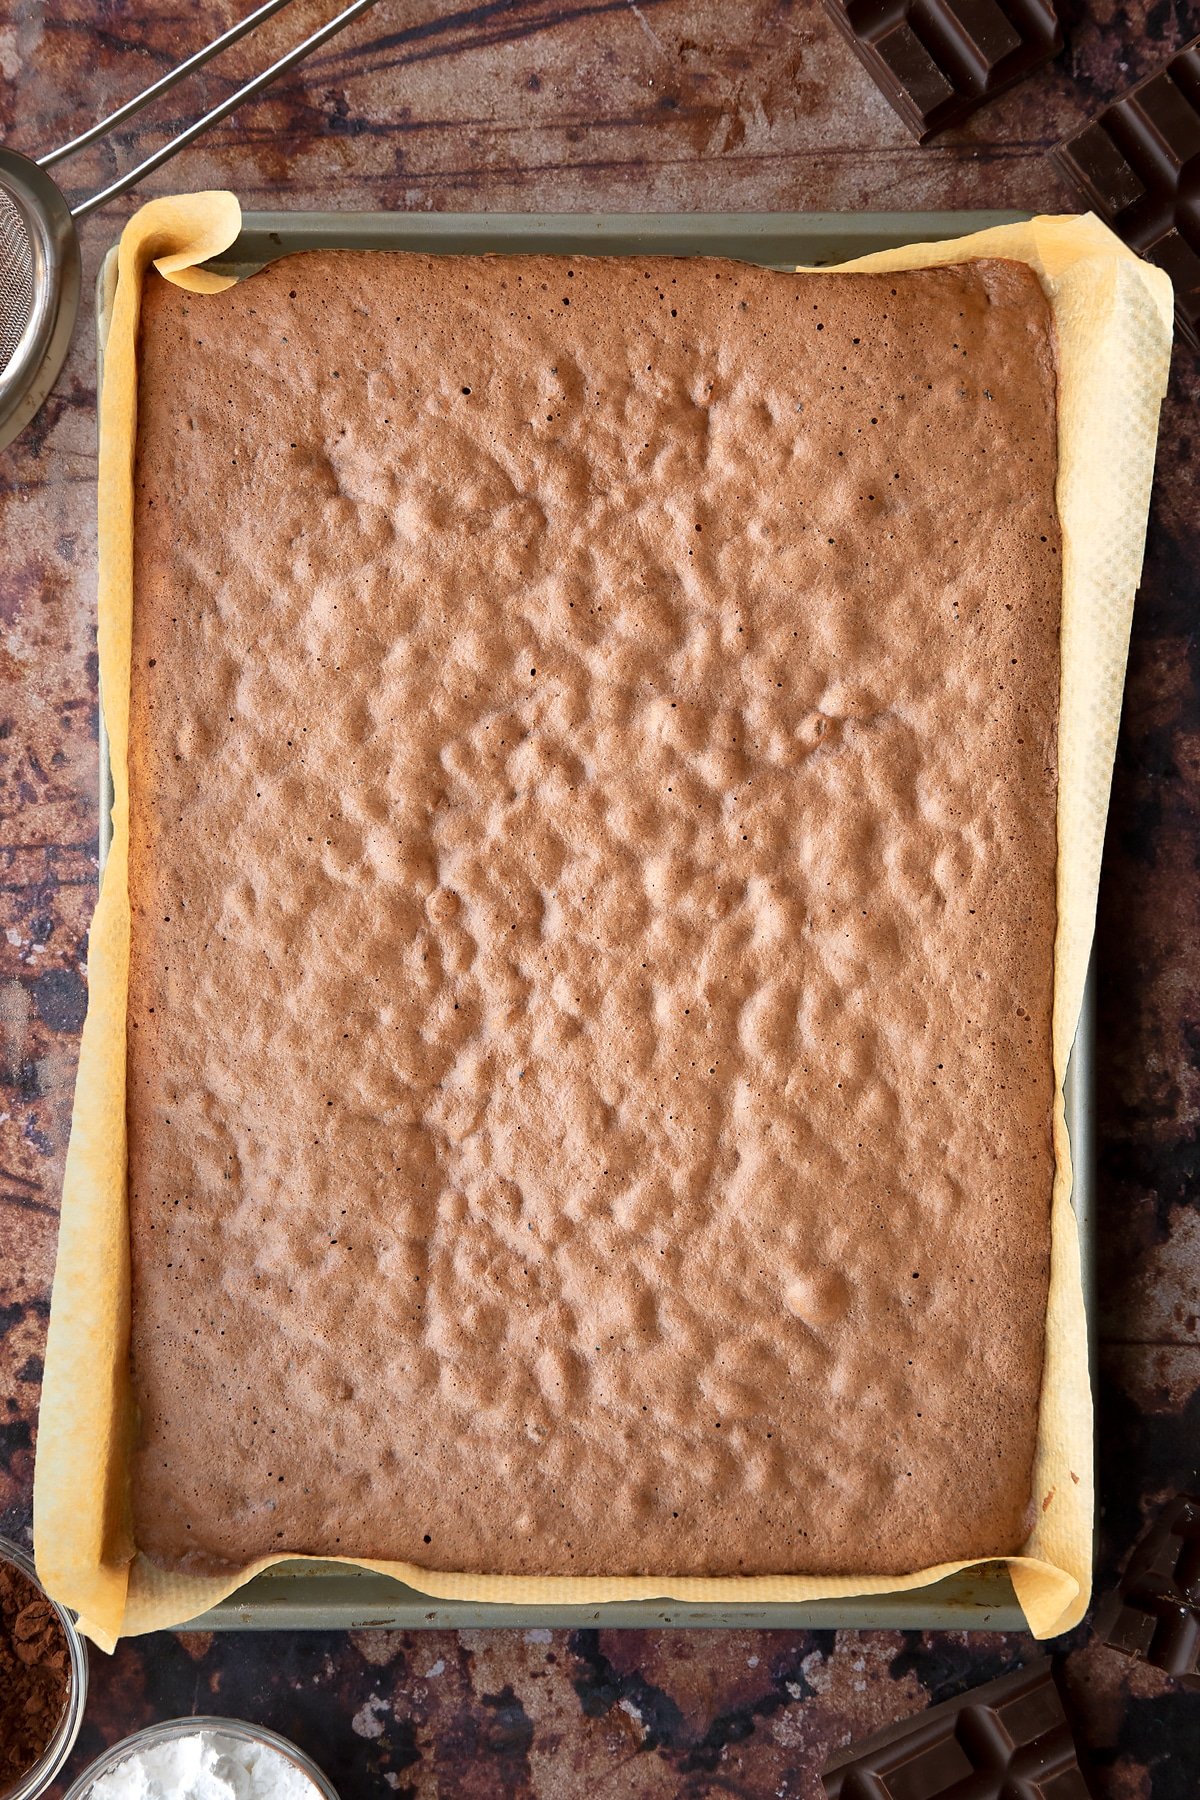 Chocolate sponge batter, freshly baked in a lined Swiss roll tray.